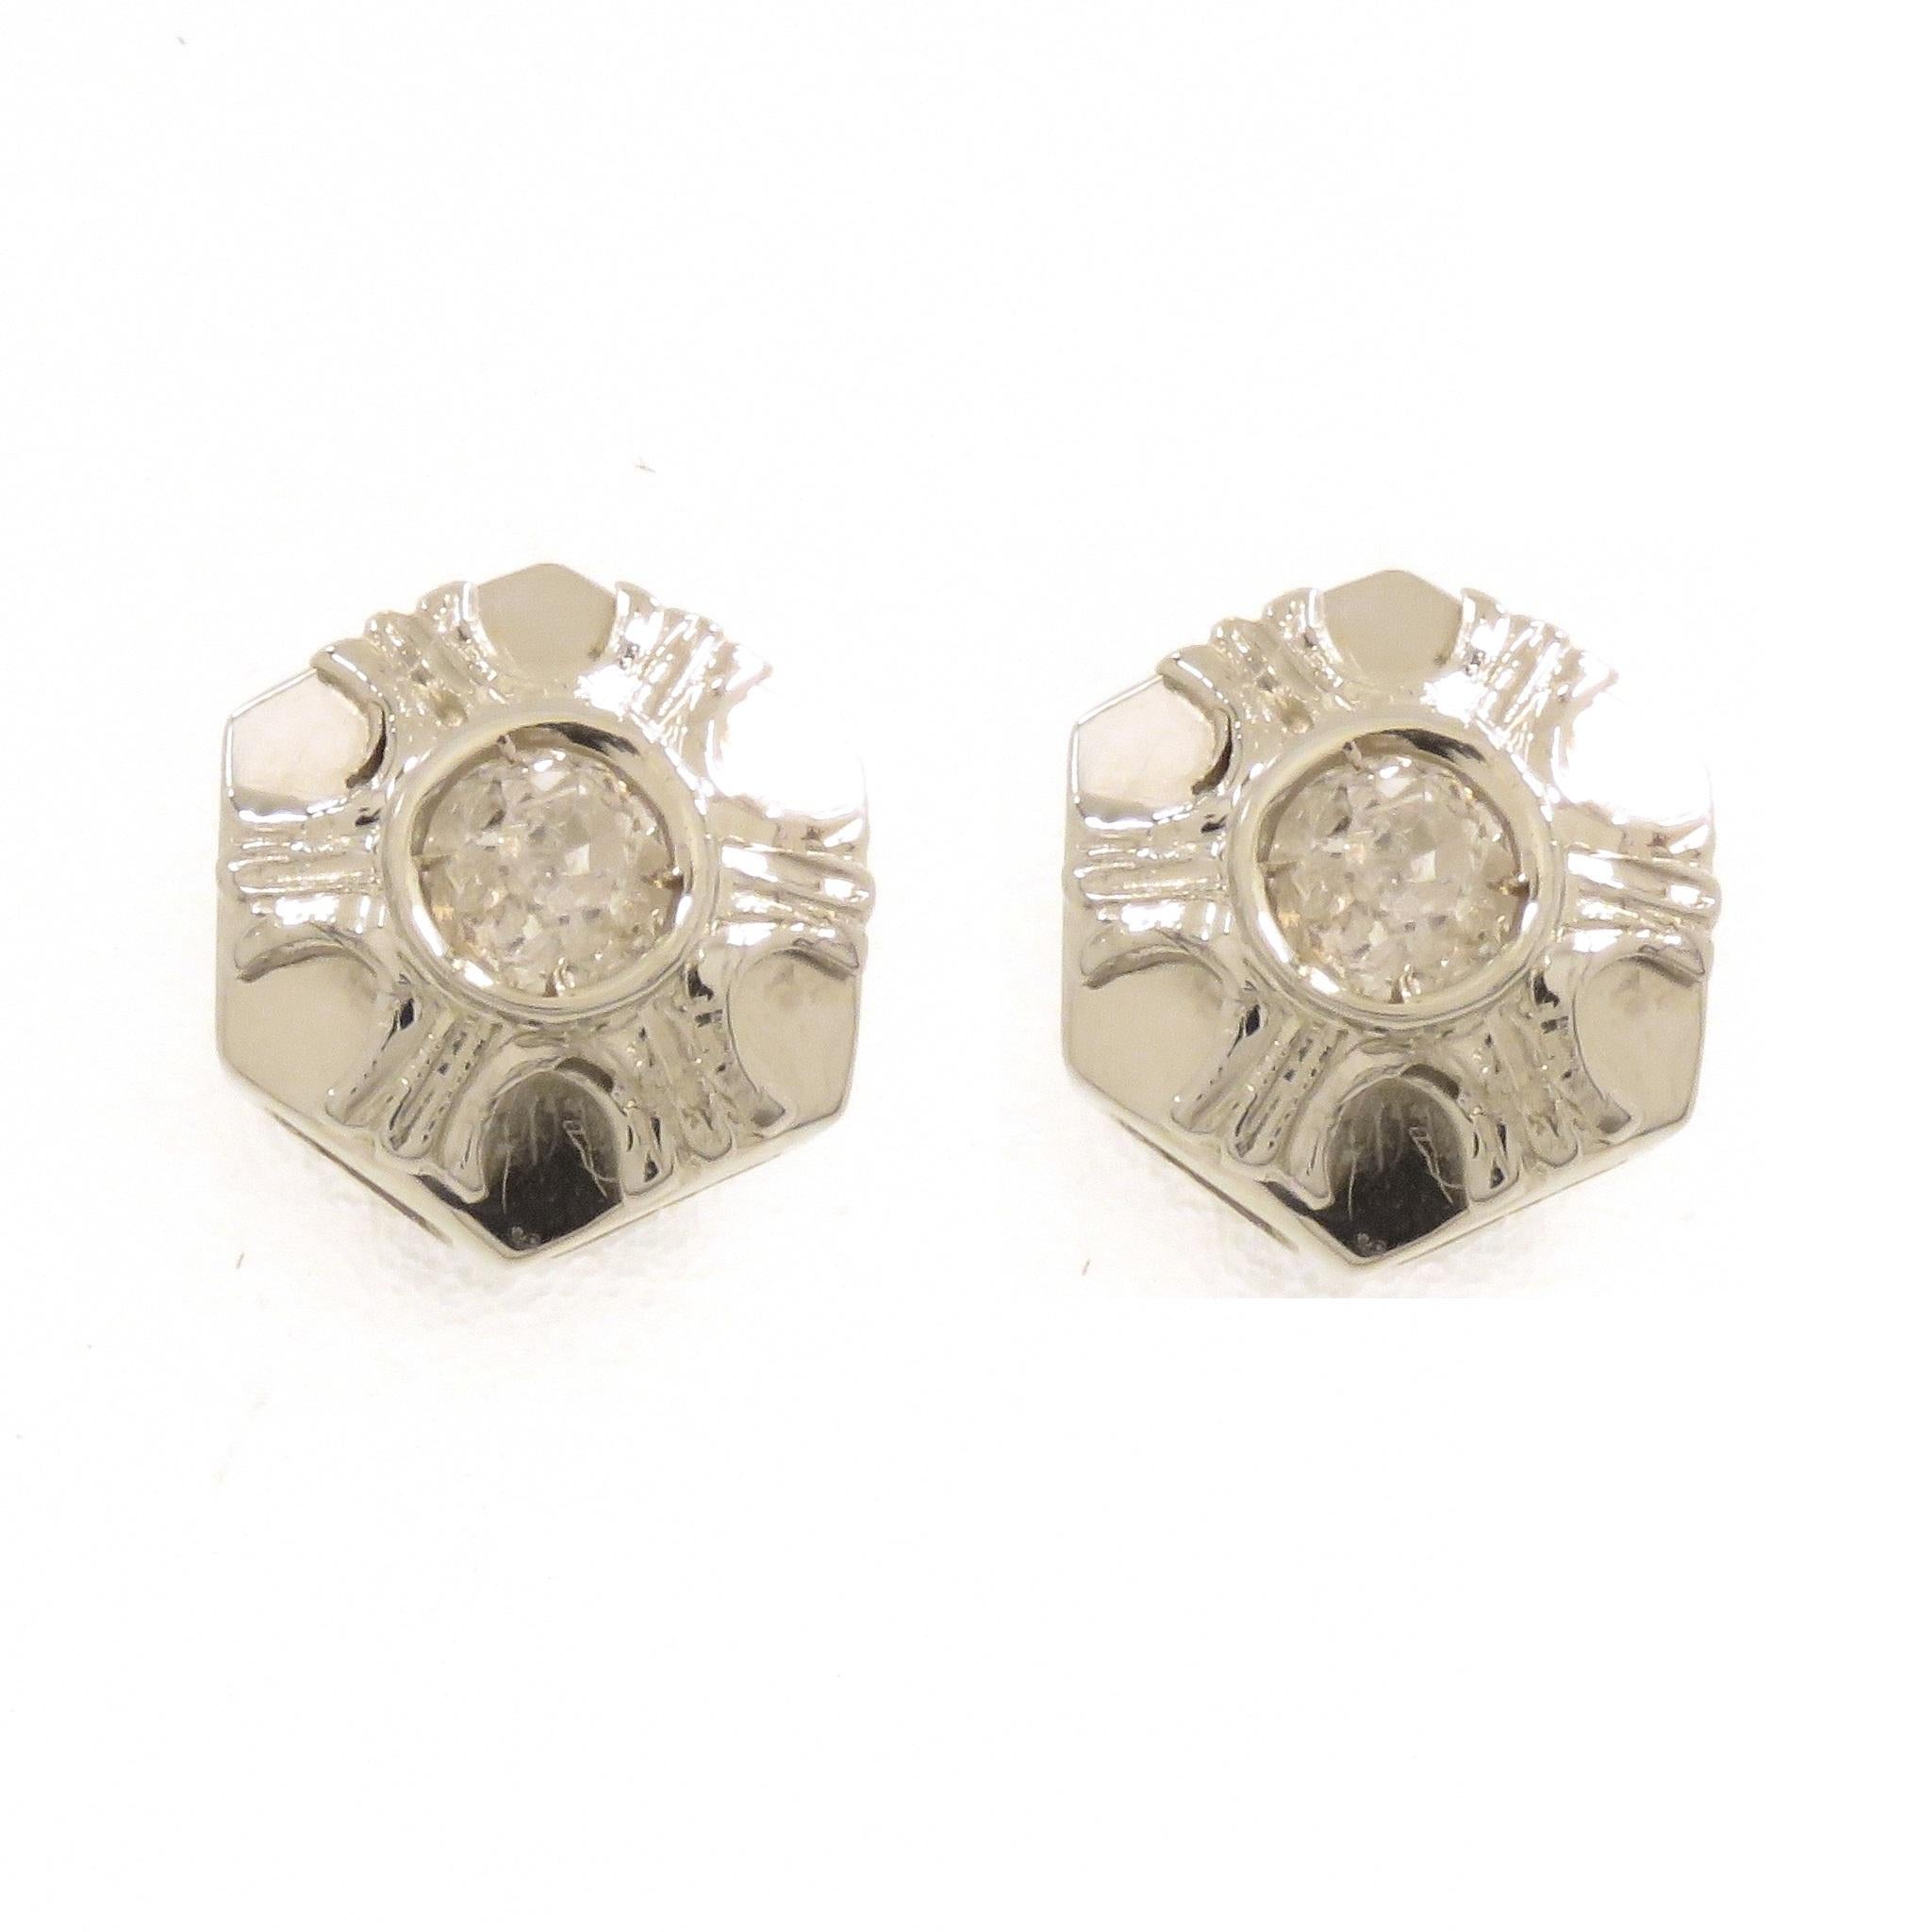 Beautiful vintage bombé stud earrings with brilliant cut diamonds. Handcrafted in 18 karat white gold. Marked with the Gold Mark 750.

Crafted in: 18 karat white gold.
2 brilliant cut diamonds: 0.30 circa ctw. 
Total weight of both earrings: 2.0